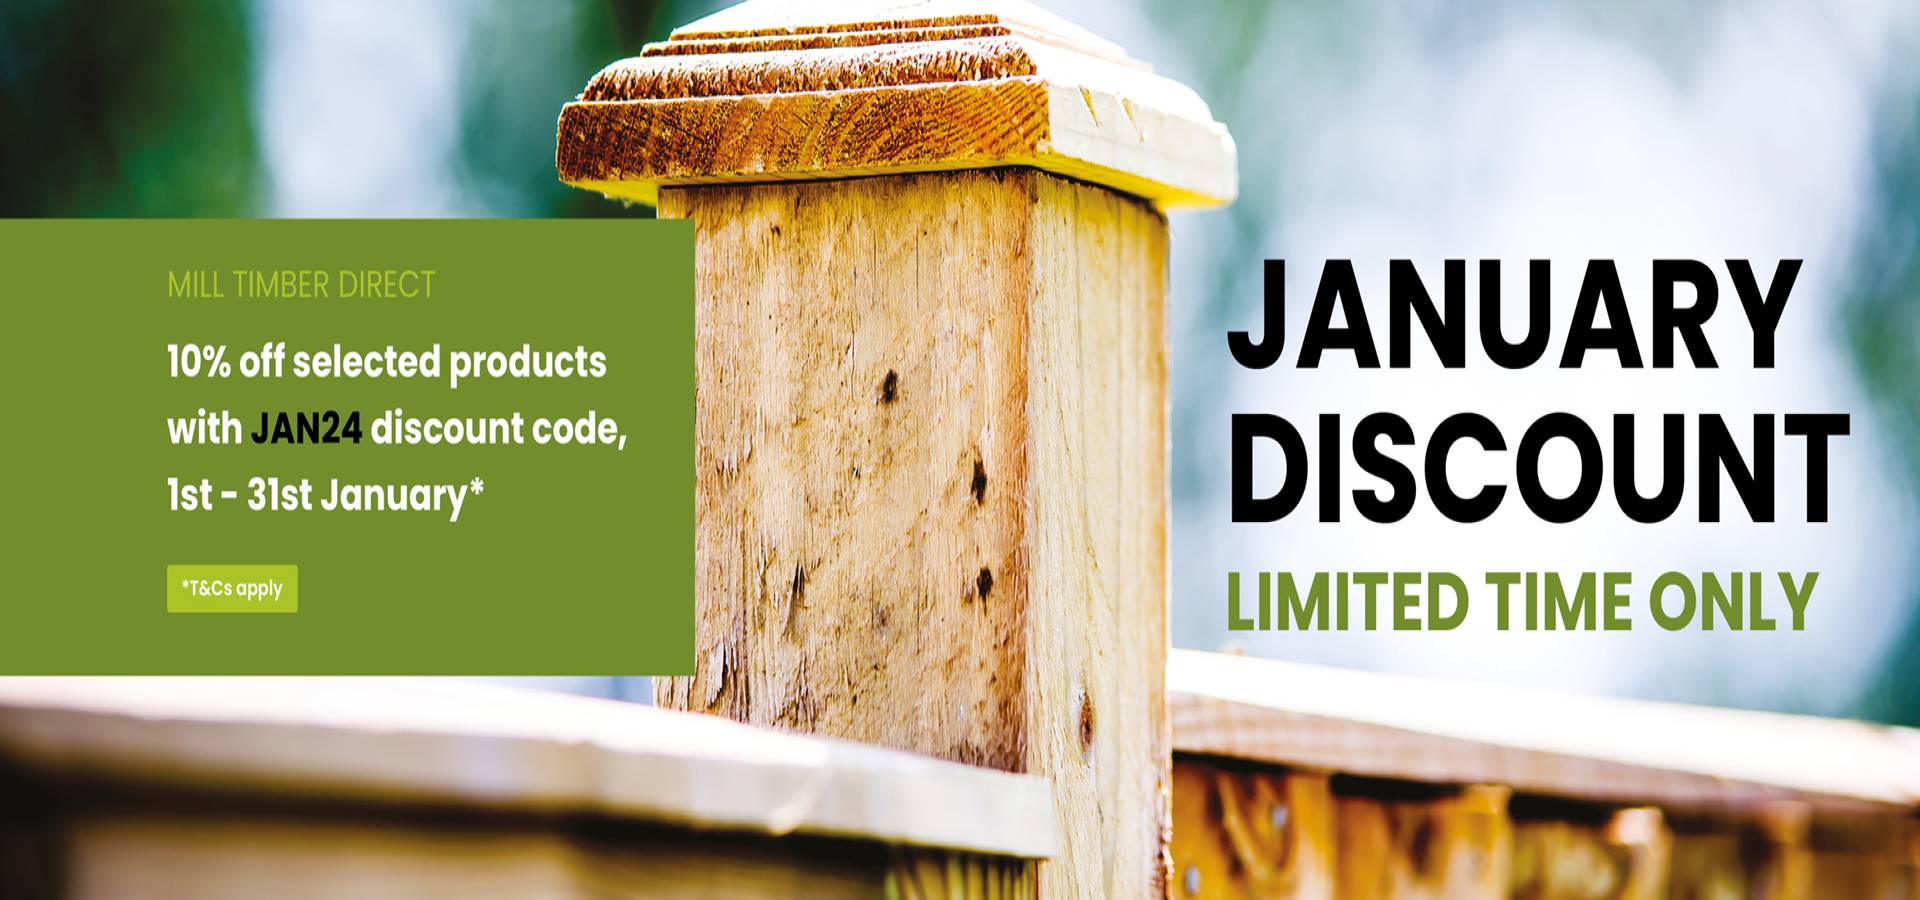 https://www.milltimberdirect.co.uk/ourbranches